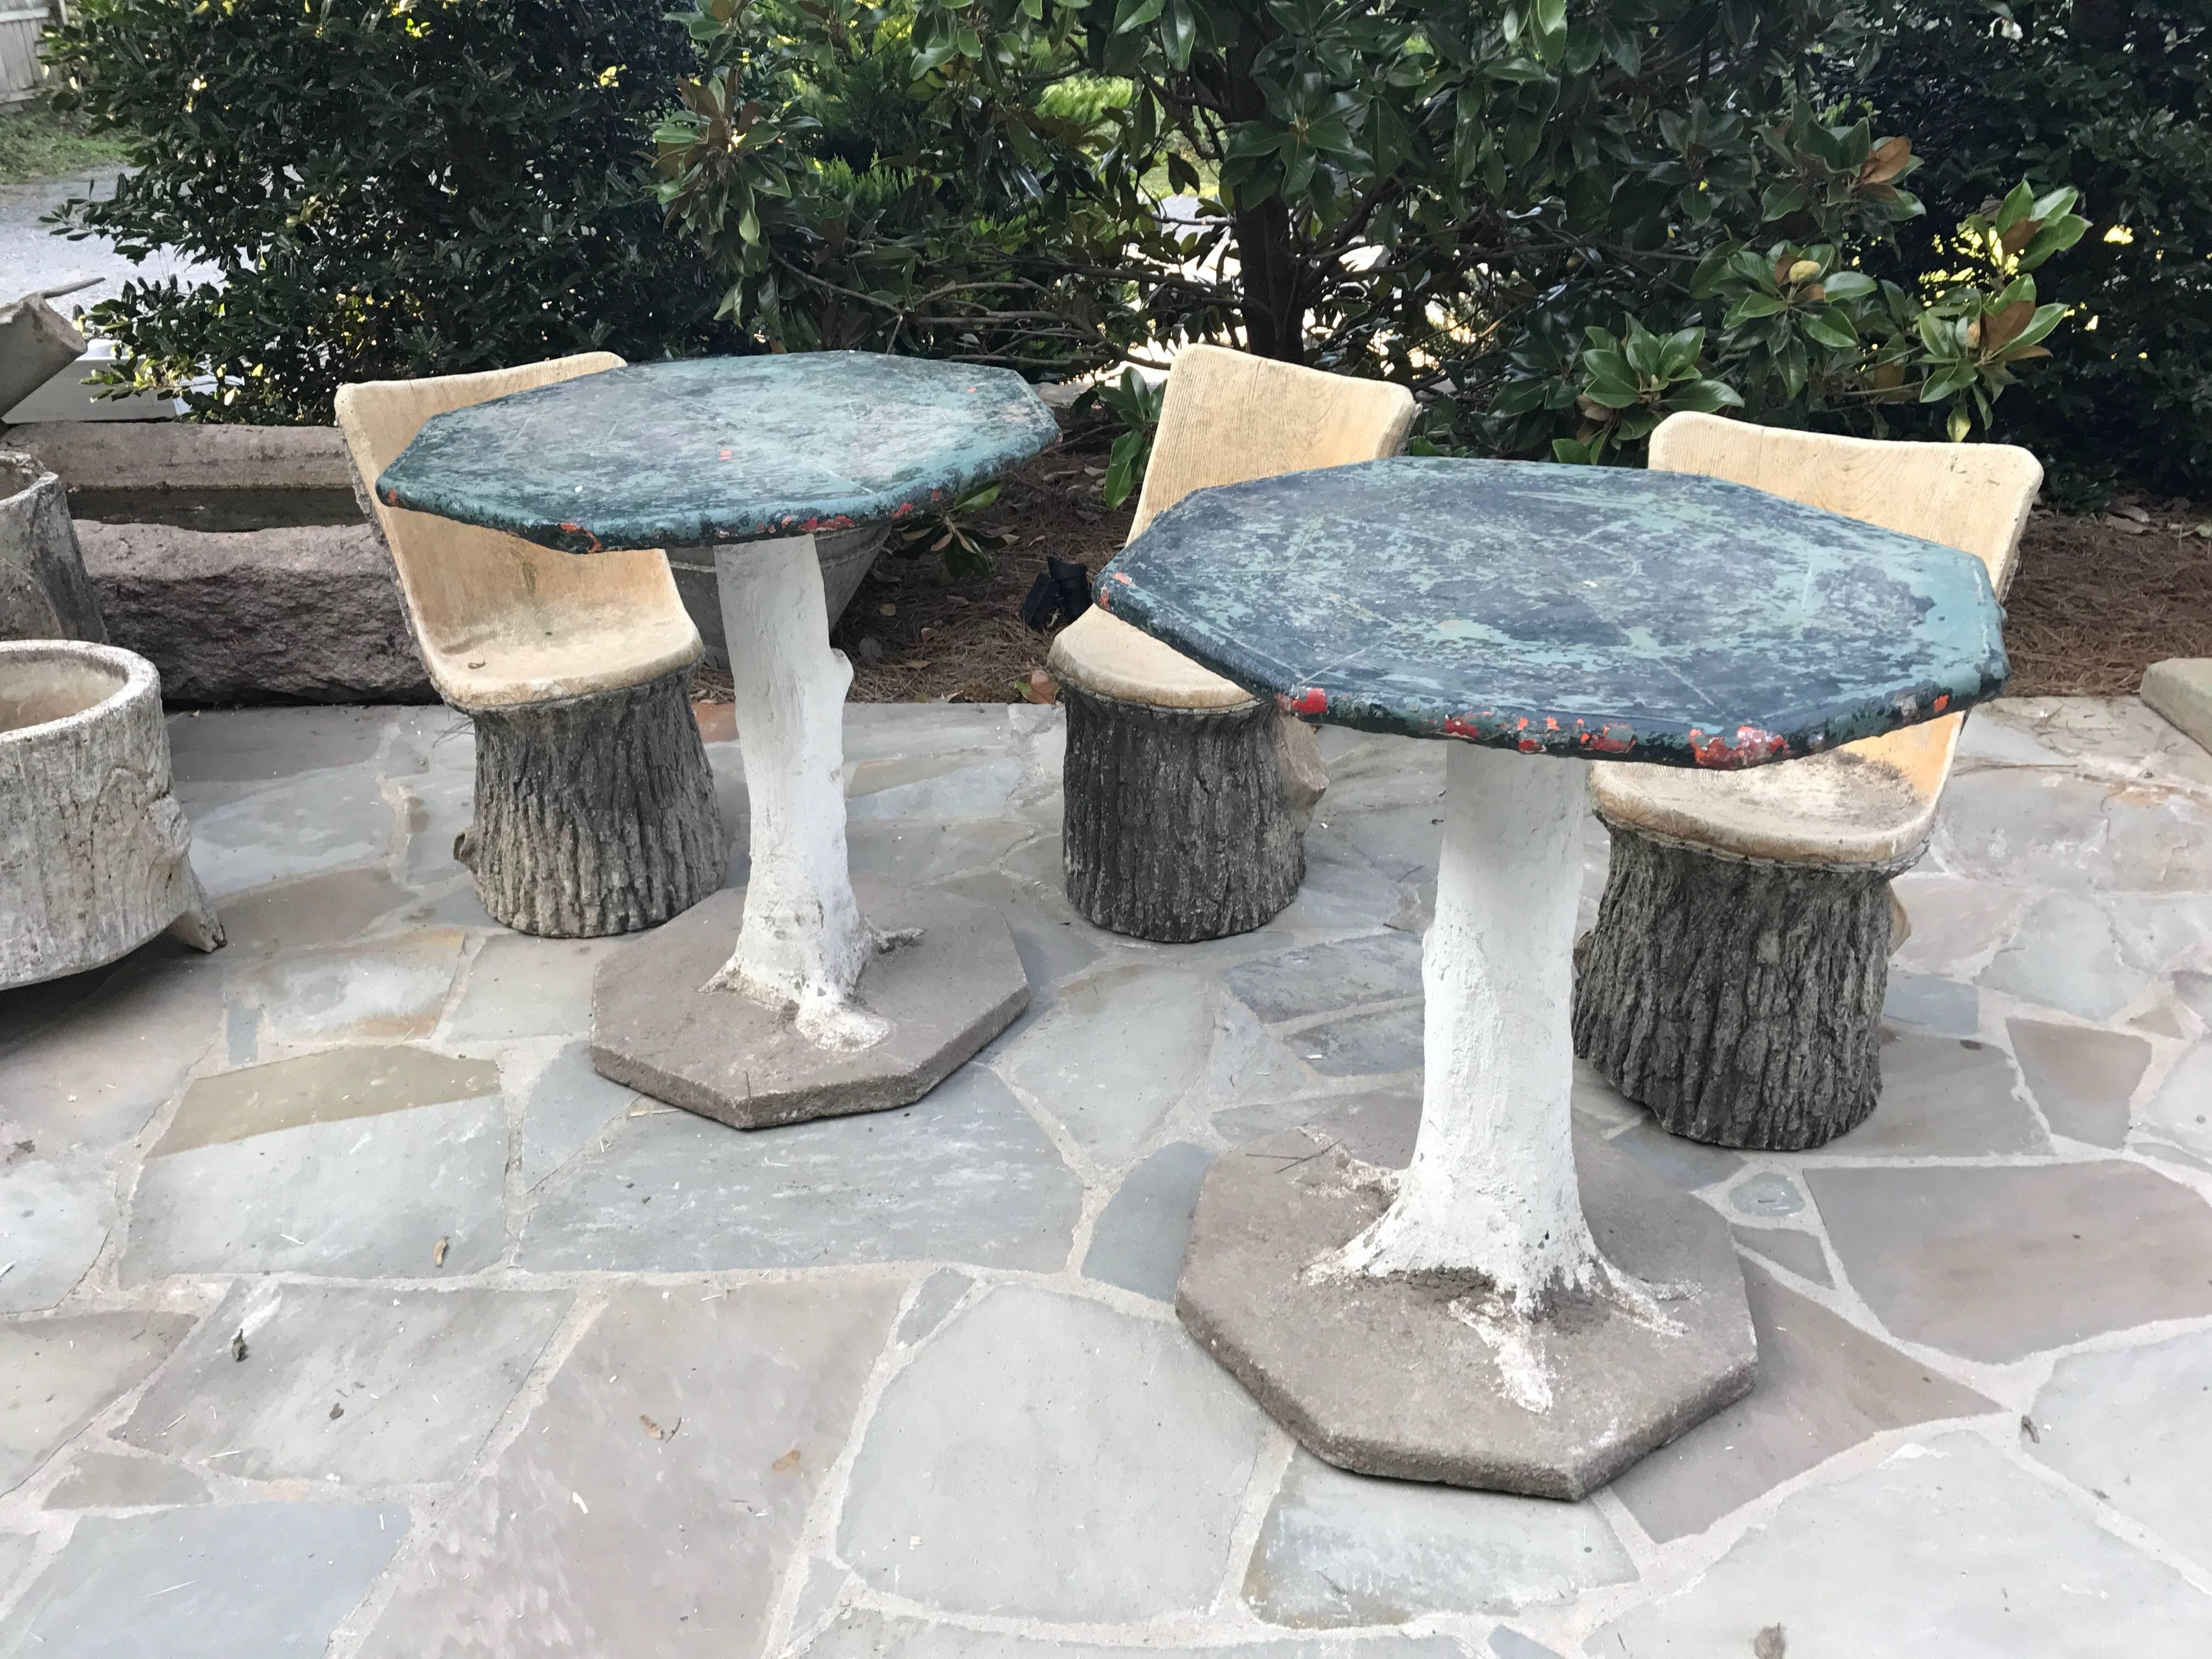 Unique pair of Faux Bois tables from the South of France. Faux Bois (false wood) made by garden craftsmen in France called 'rocailleurs' was at its height in the late 19th Century. In 1870s Joseph Monier, a French gardener who invented ferrocement